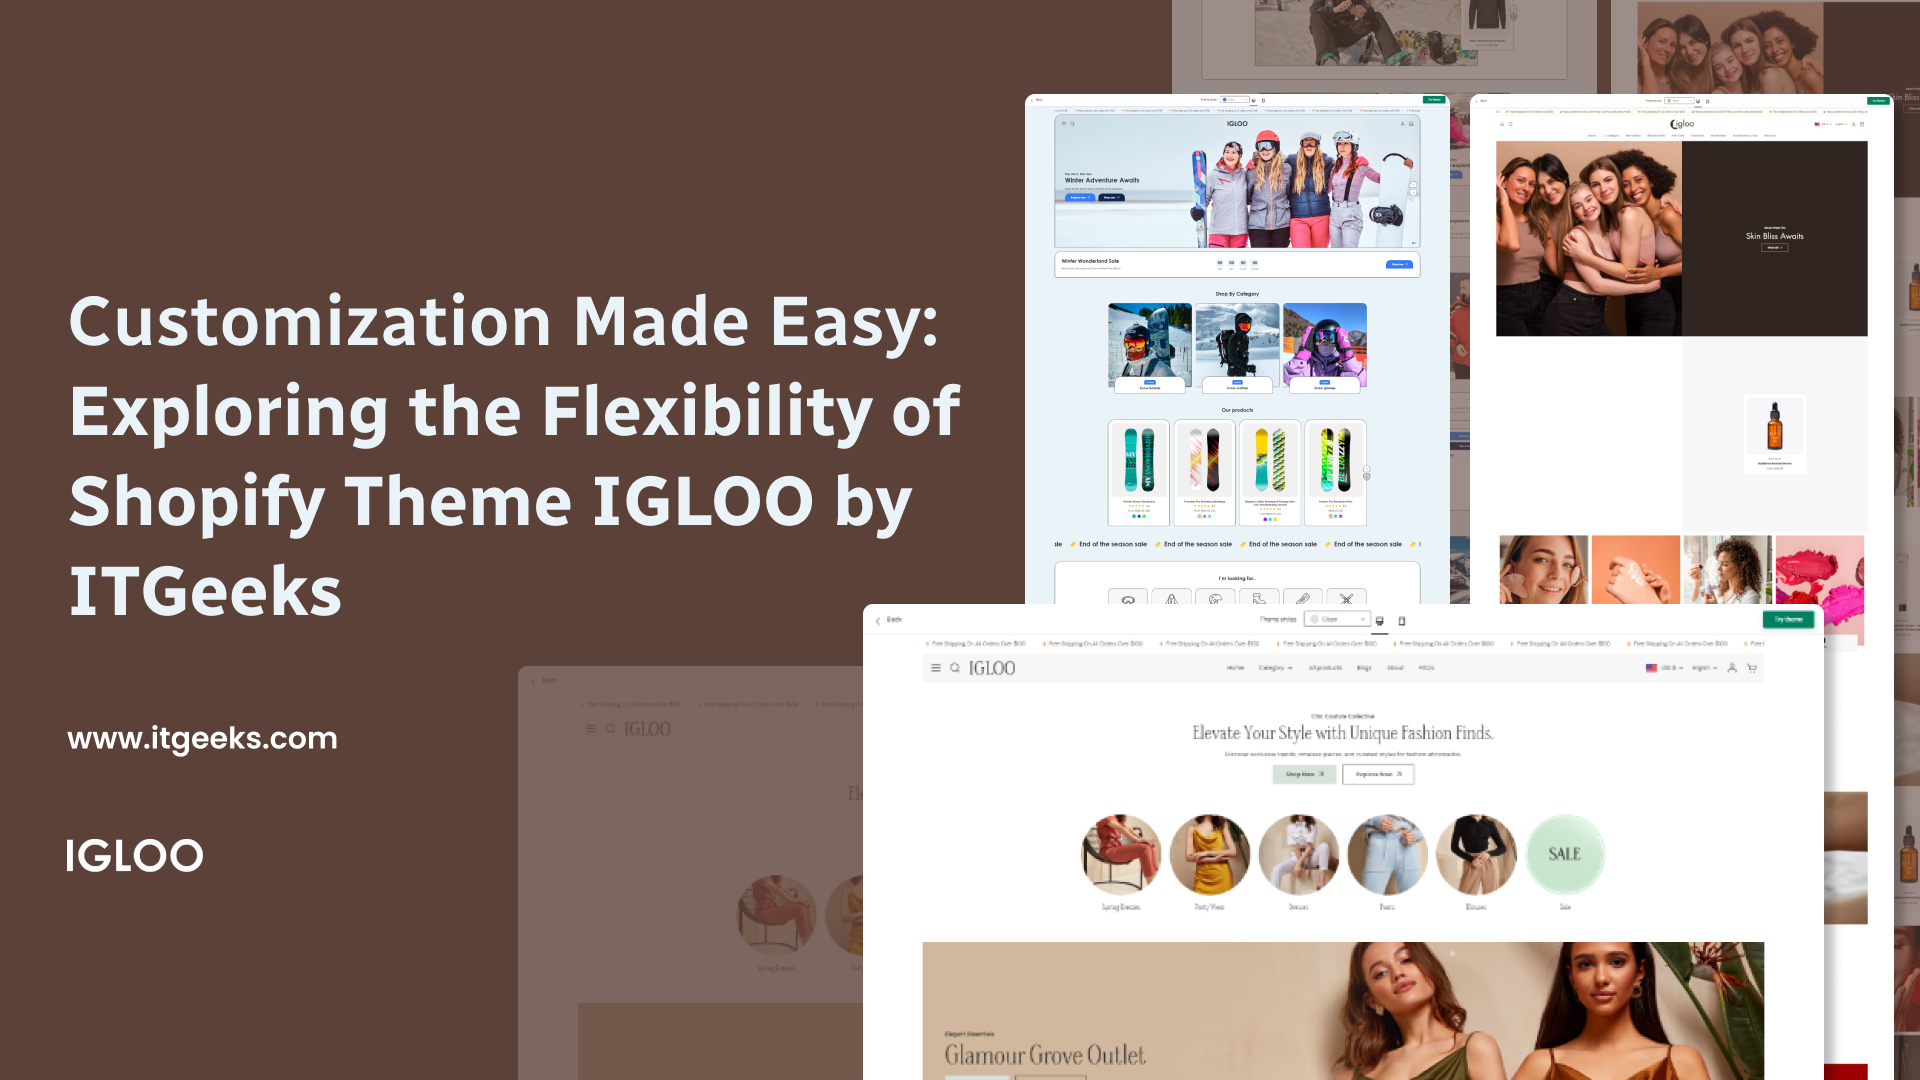 Customization Made Easy: Exploring the Flexibility of Shopify Theme IGLOO by ITGeeks